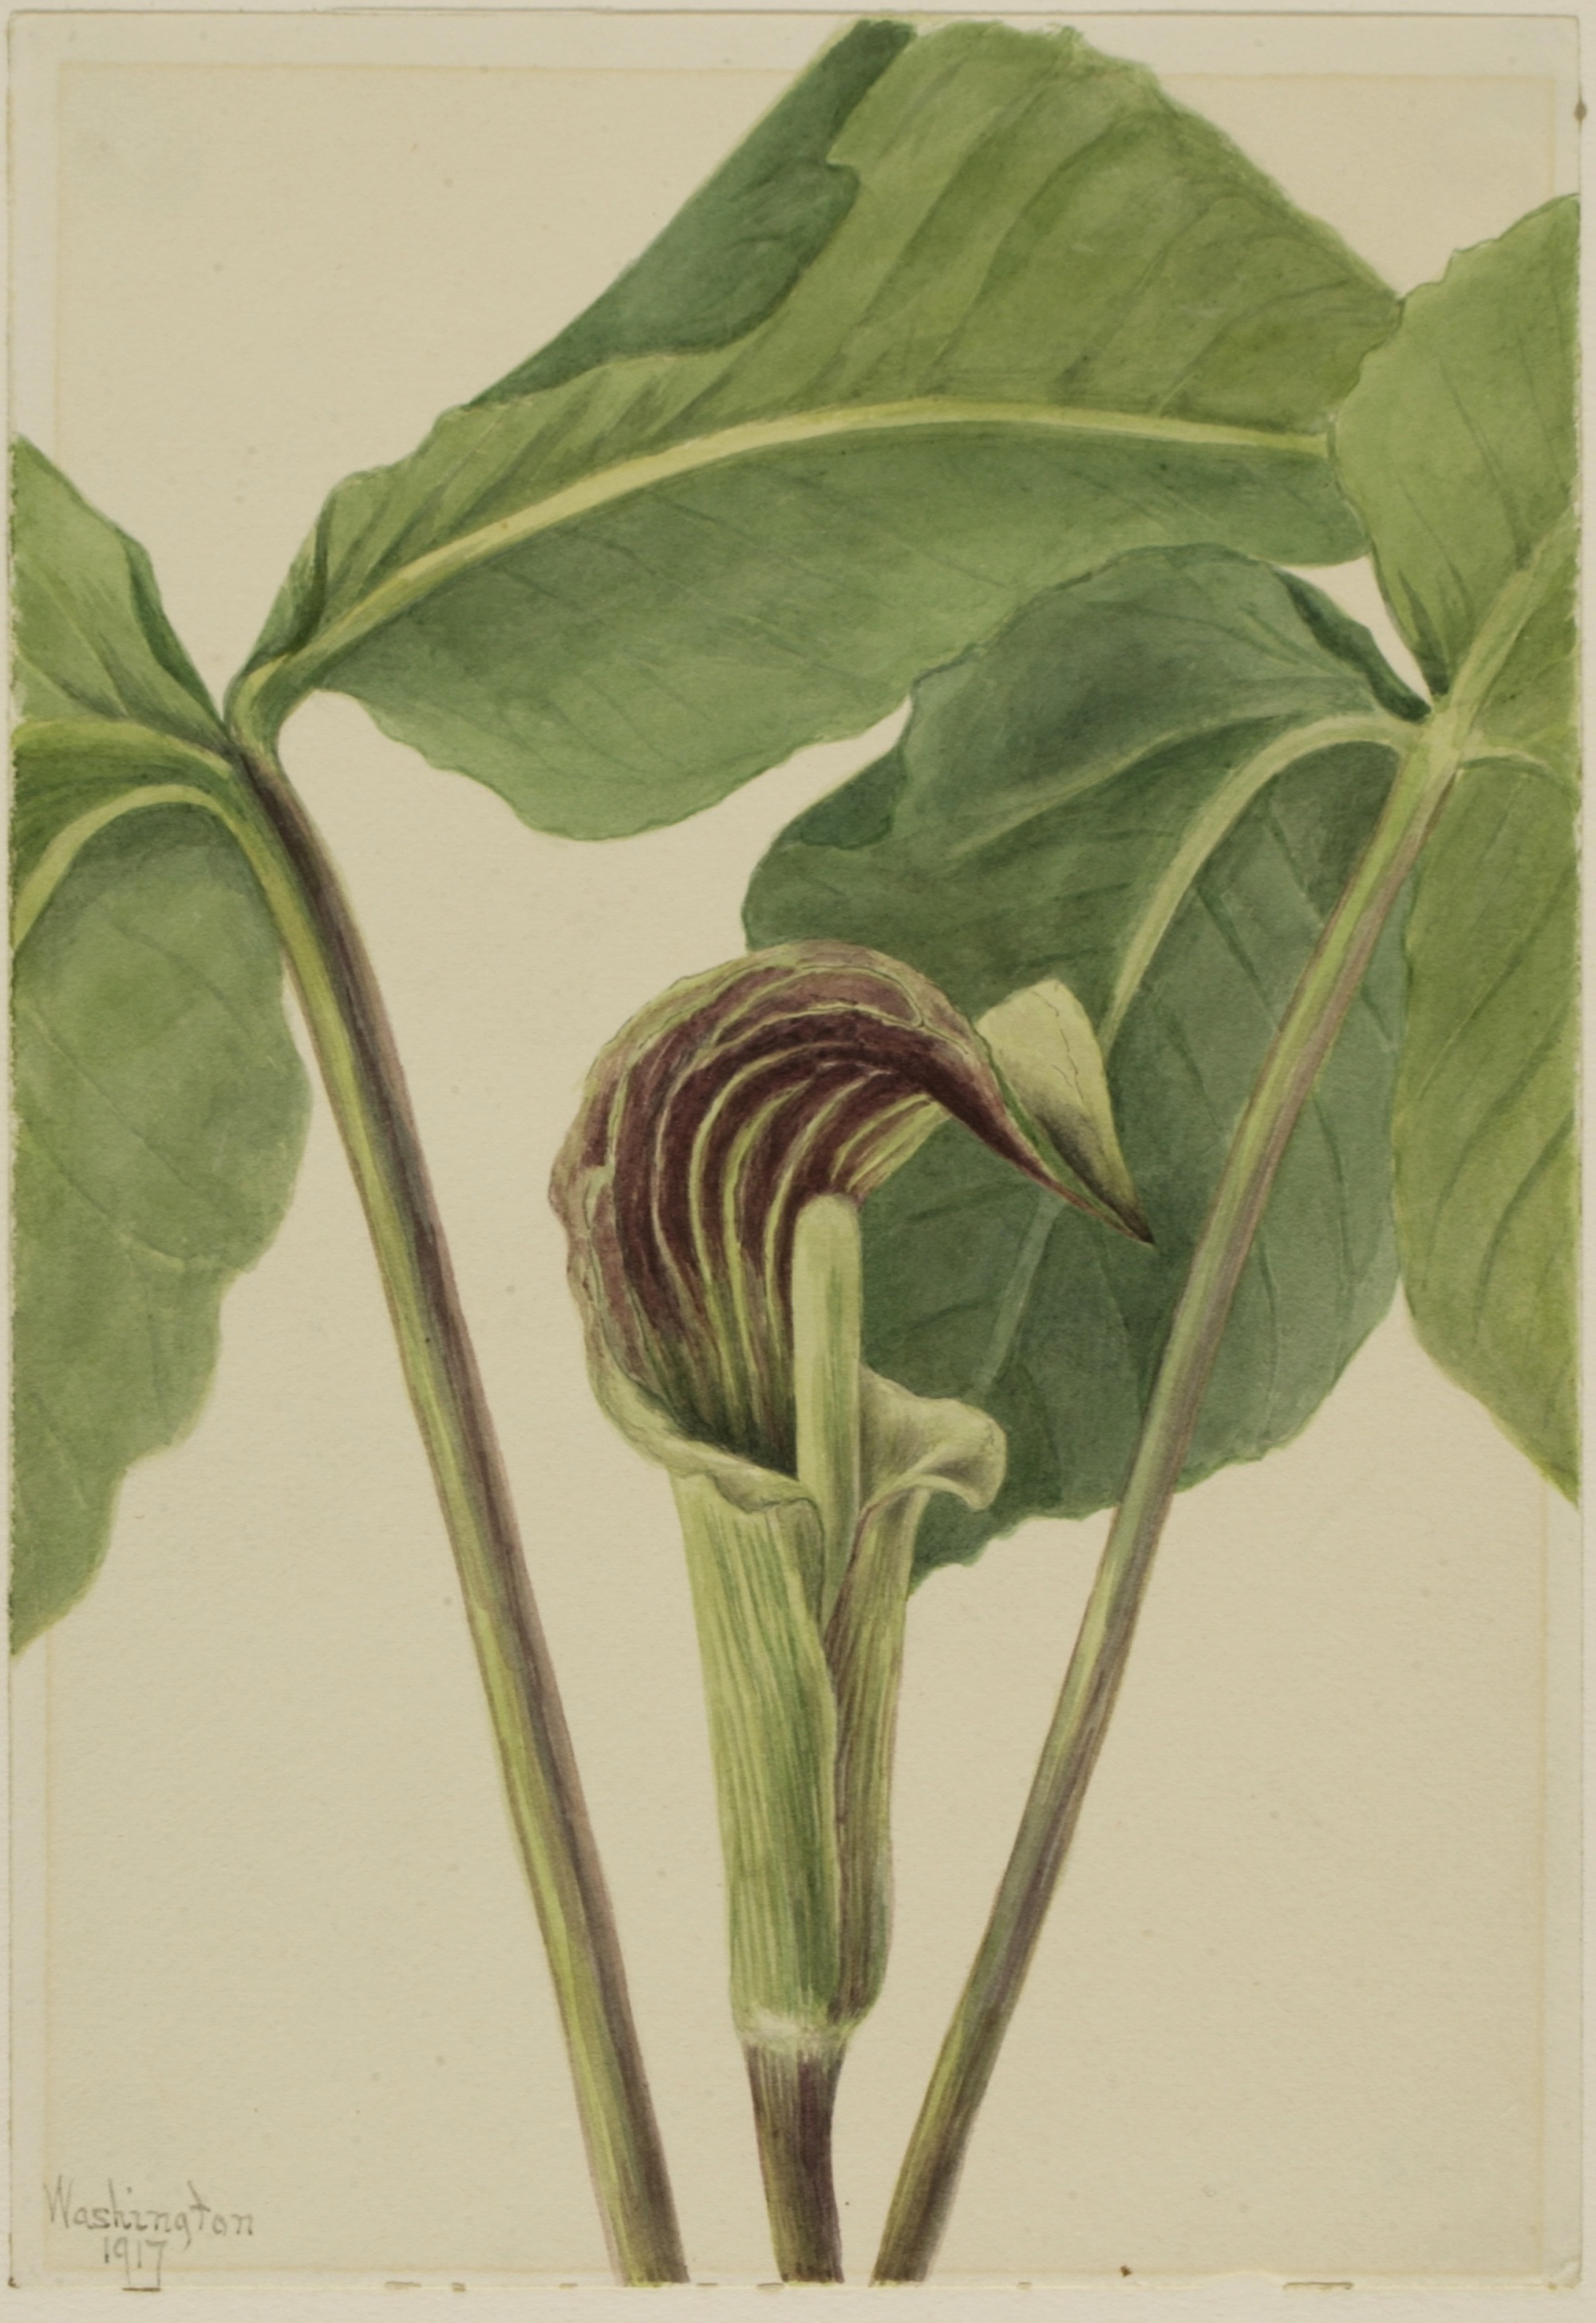 1917 Jack-in-the-Pulpit illustration by Mary Vaux Walcott.